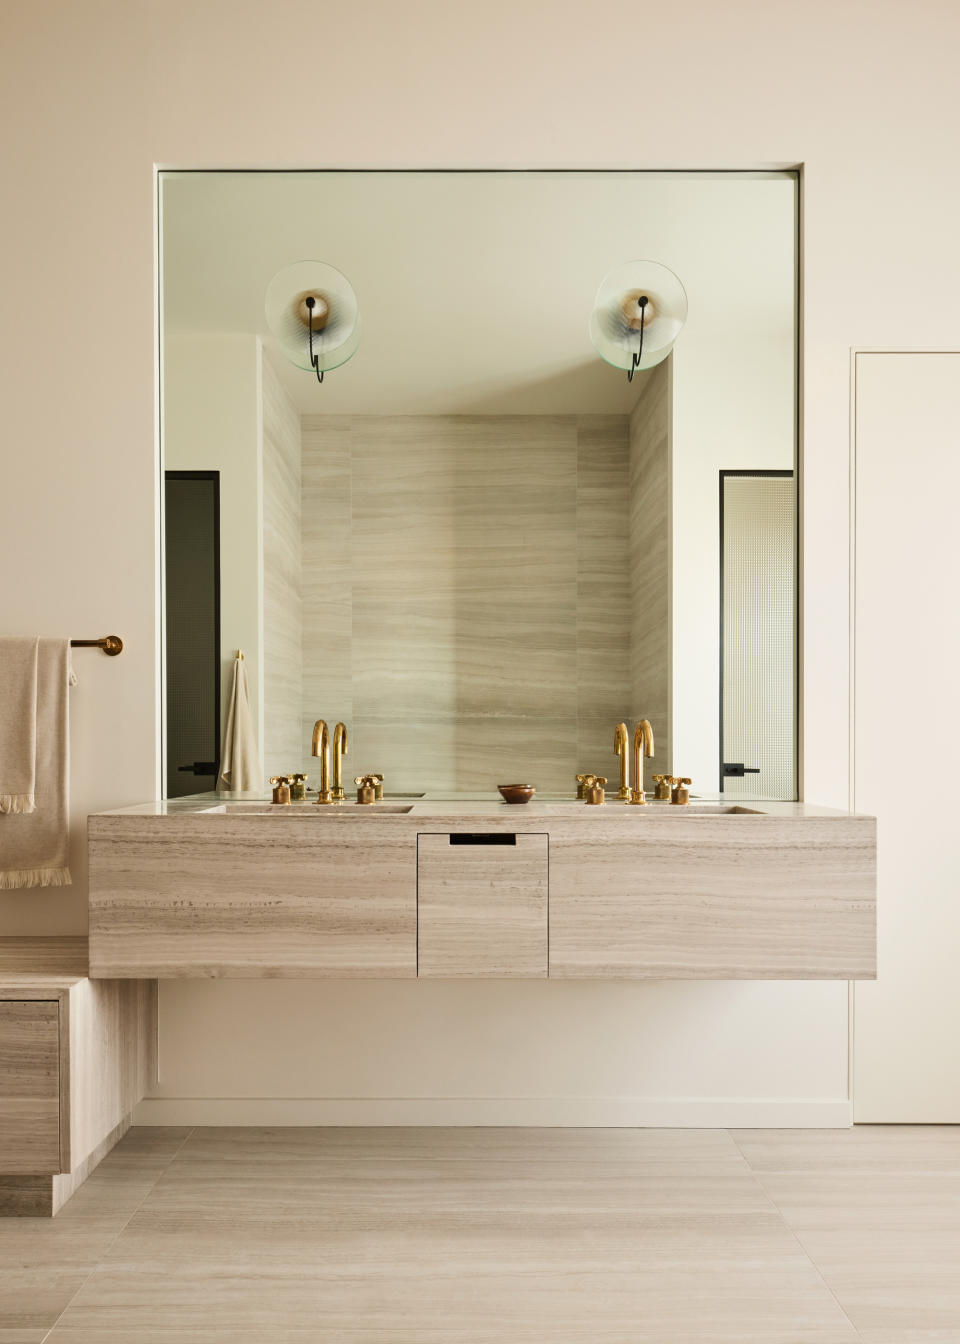 A bathroom with unlacquered brass taps